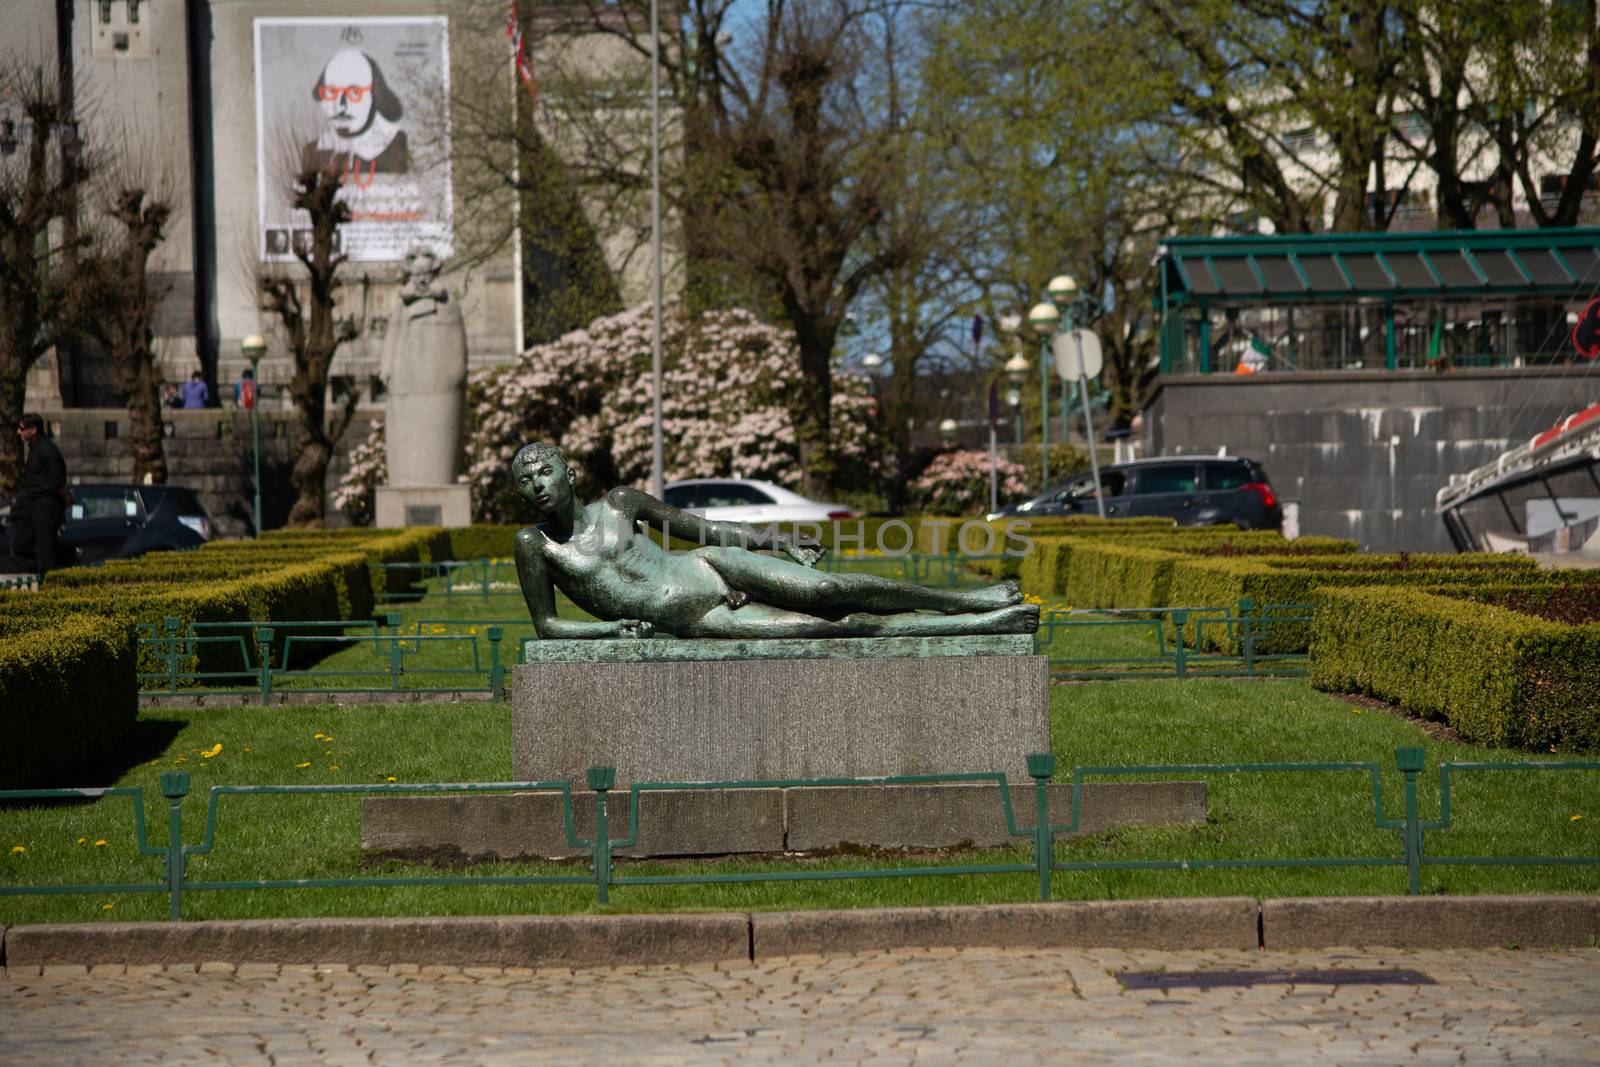 View on Ole Bull Plass statue or sculpture street and park in Bergen, Norway by kb79